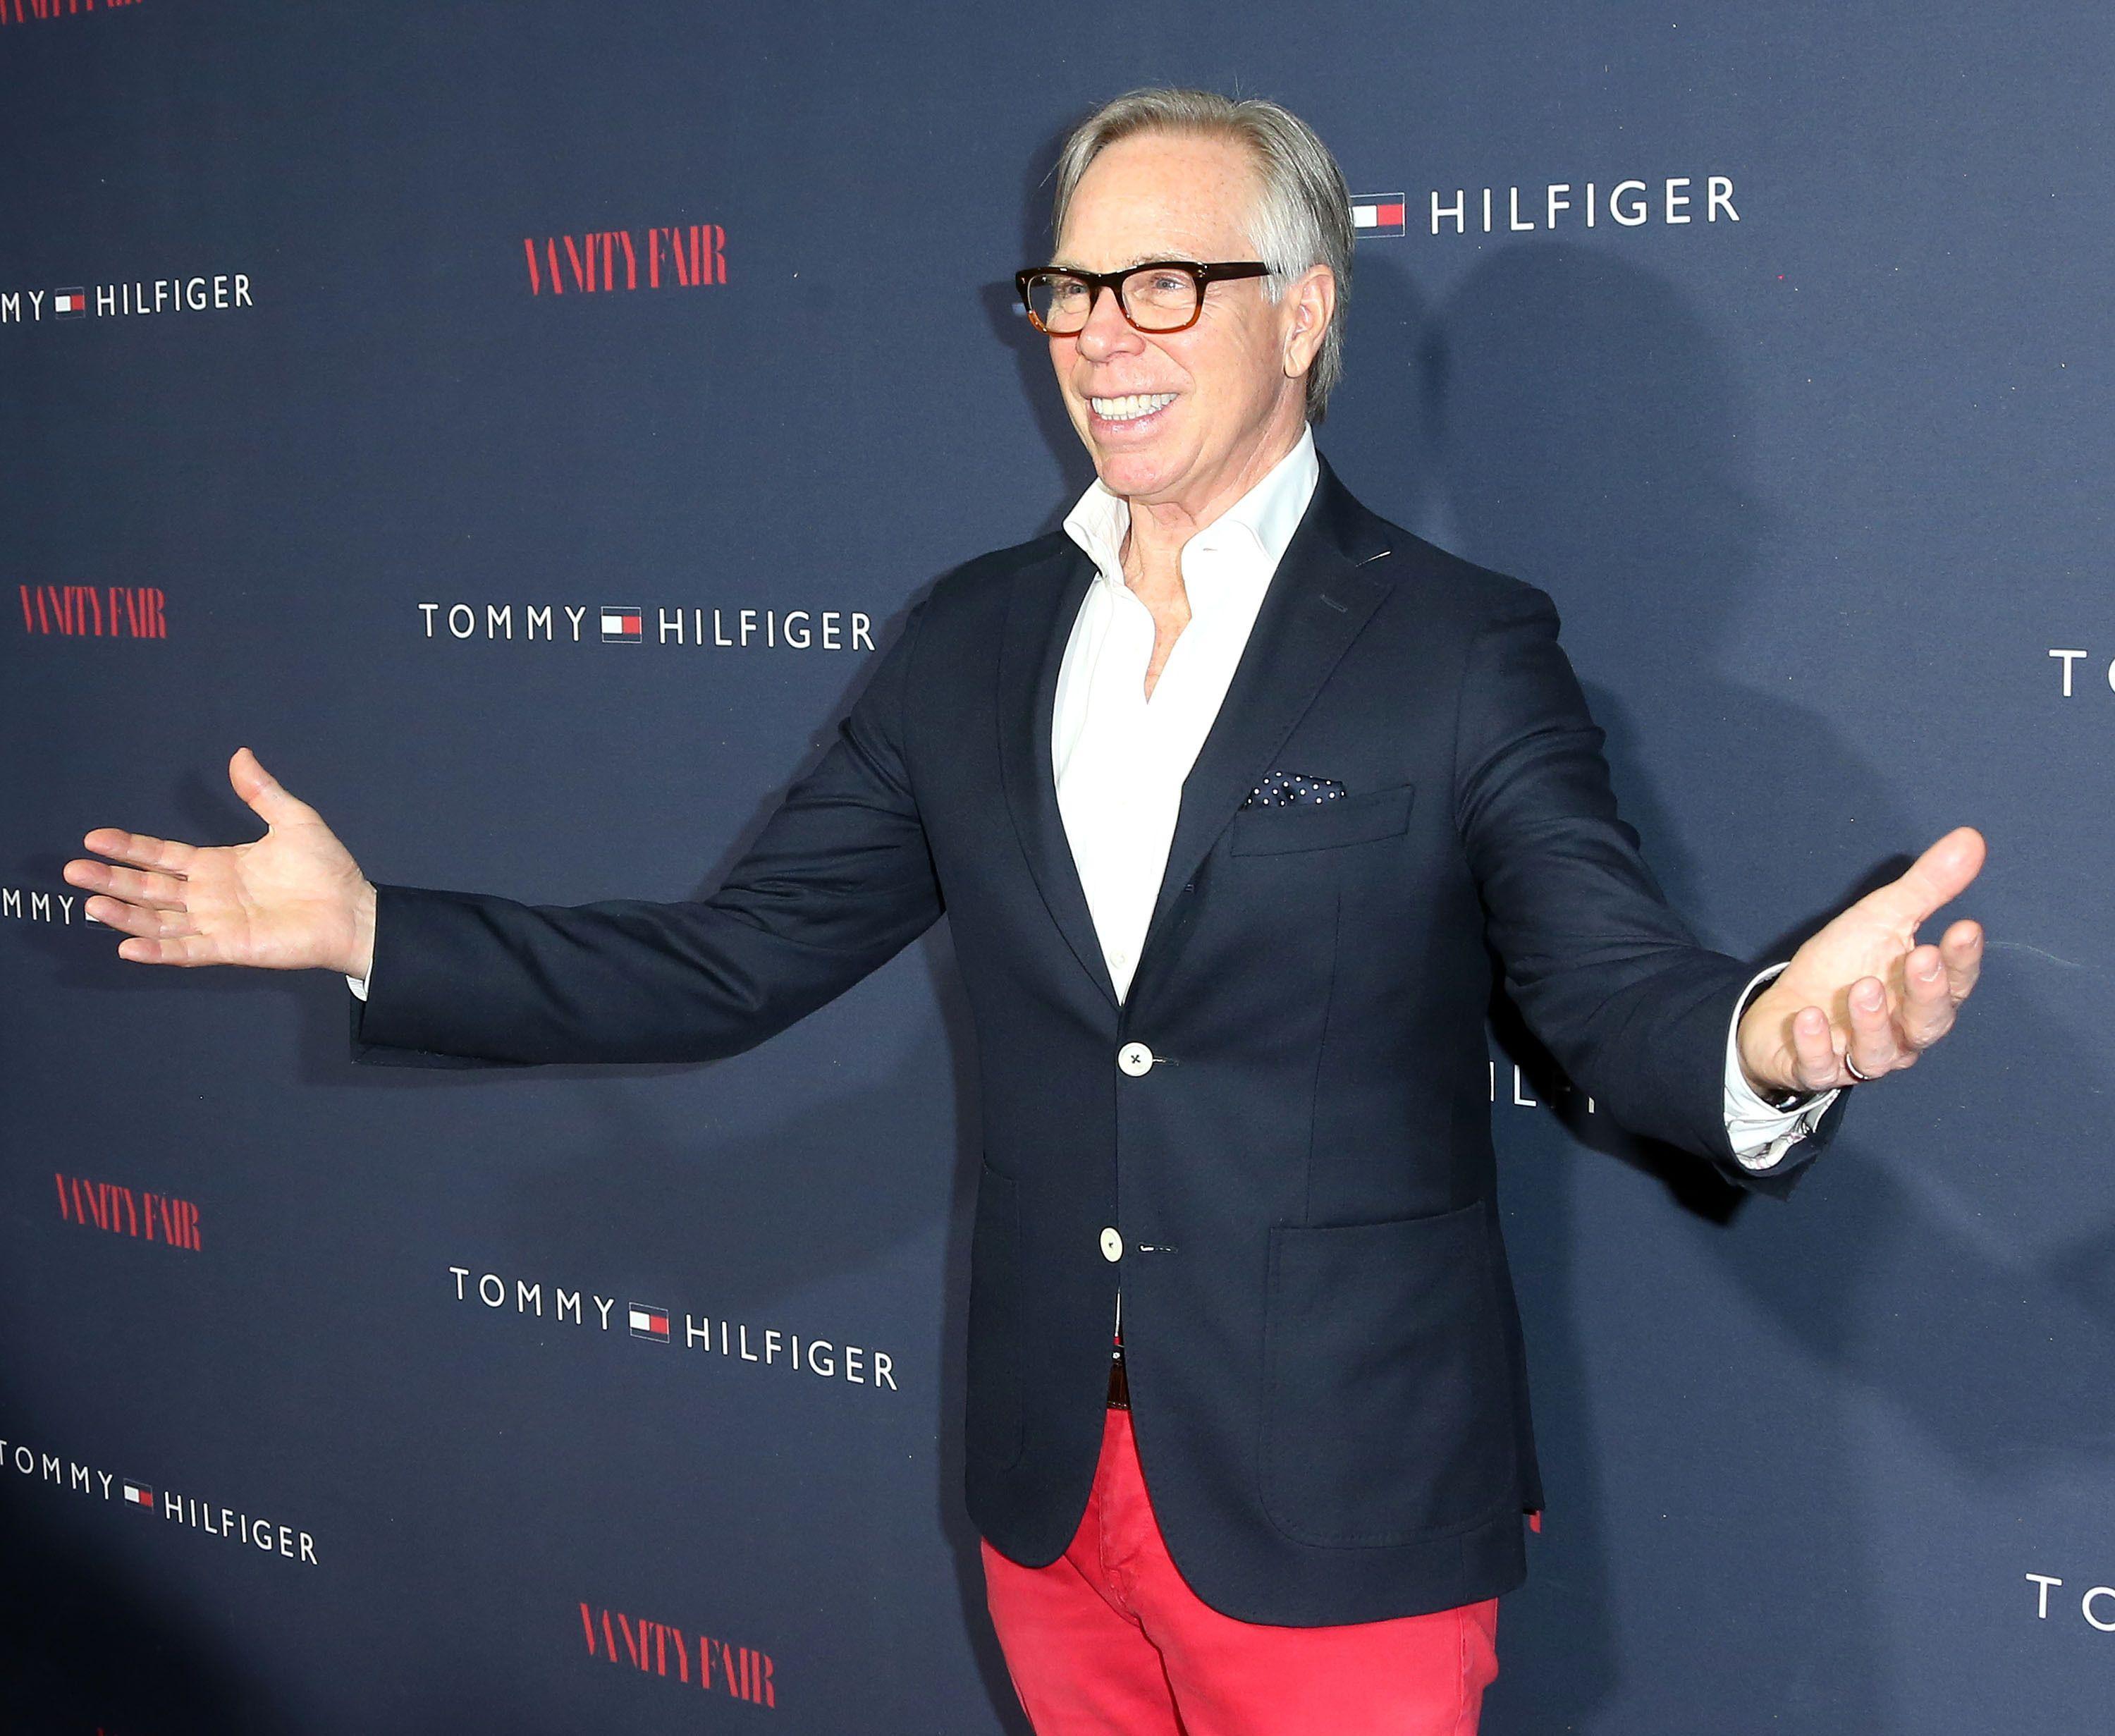 Tommy Hilfiger Wallpapers Image Photos Pictures Backgrounds